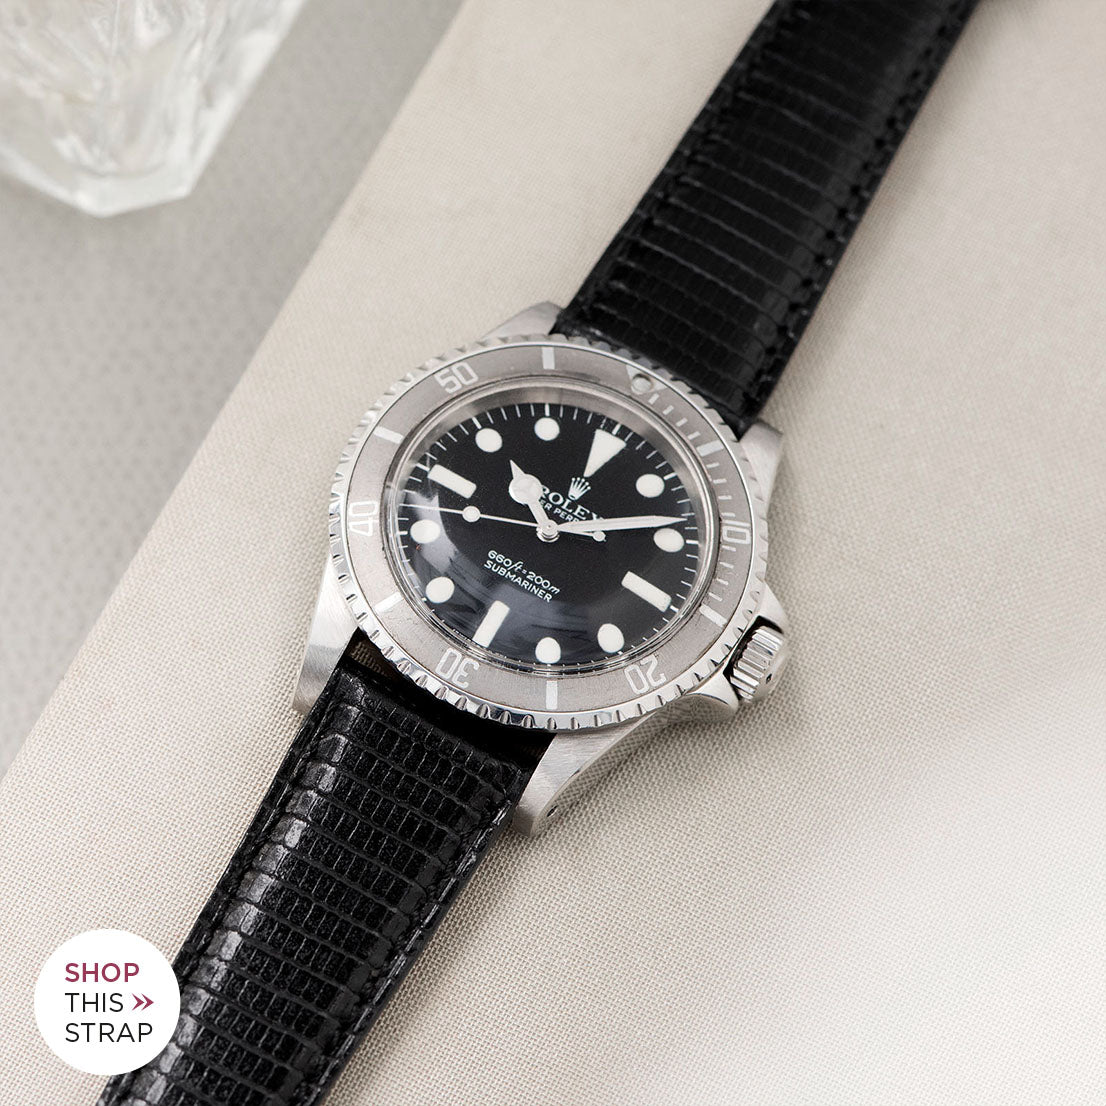 Bulang and Sons_Strap Guide_The Rolex 5513 Faded Maxi Submariner_Brilliant Black Lizard Leather Watch Strap